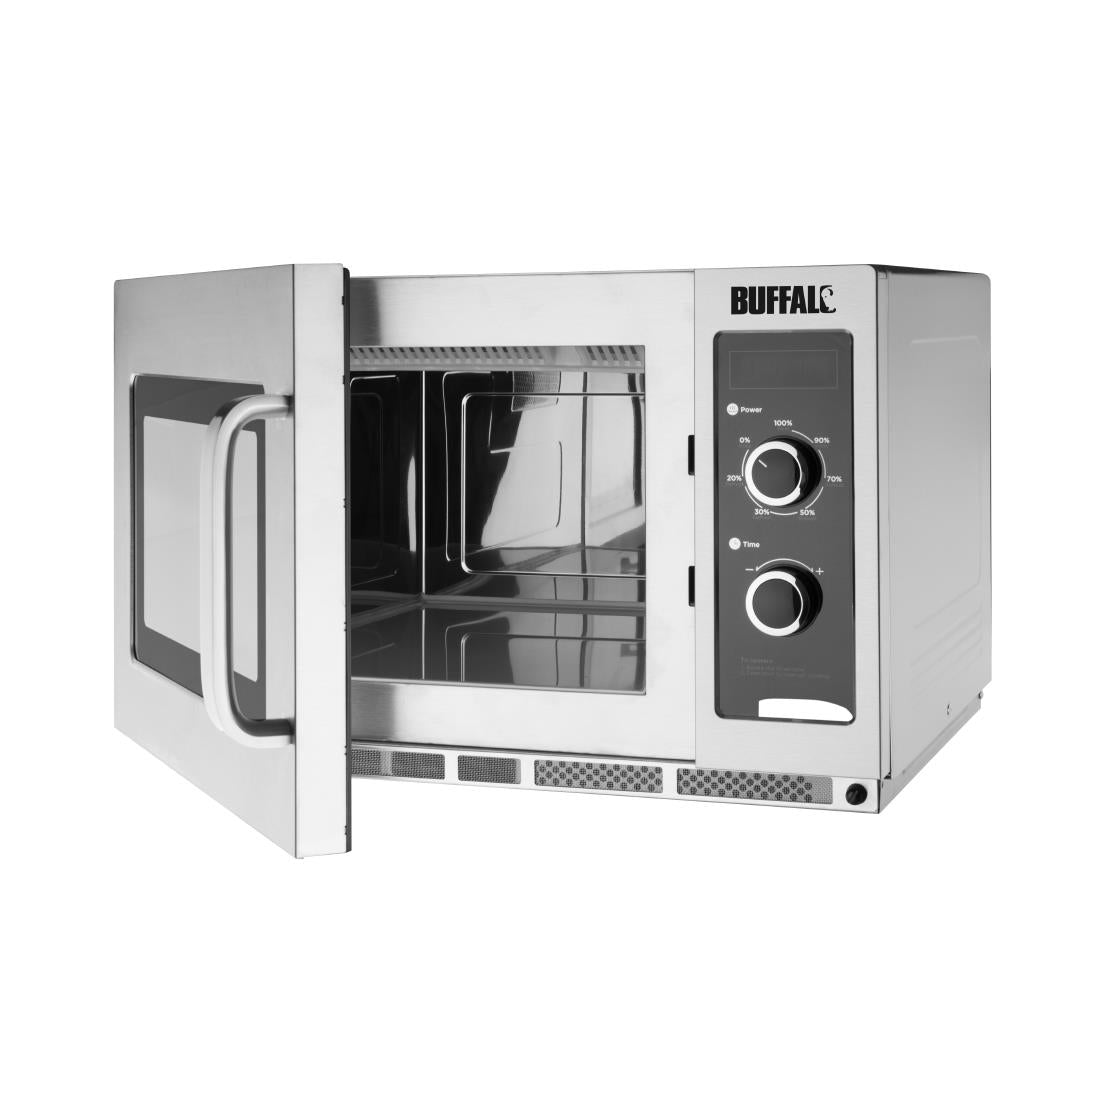 FB863 Buffalo Manual Commercial Microwave Oven 34ltr 1800W JD Catering Equipment Solutions Ltd